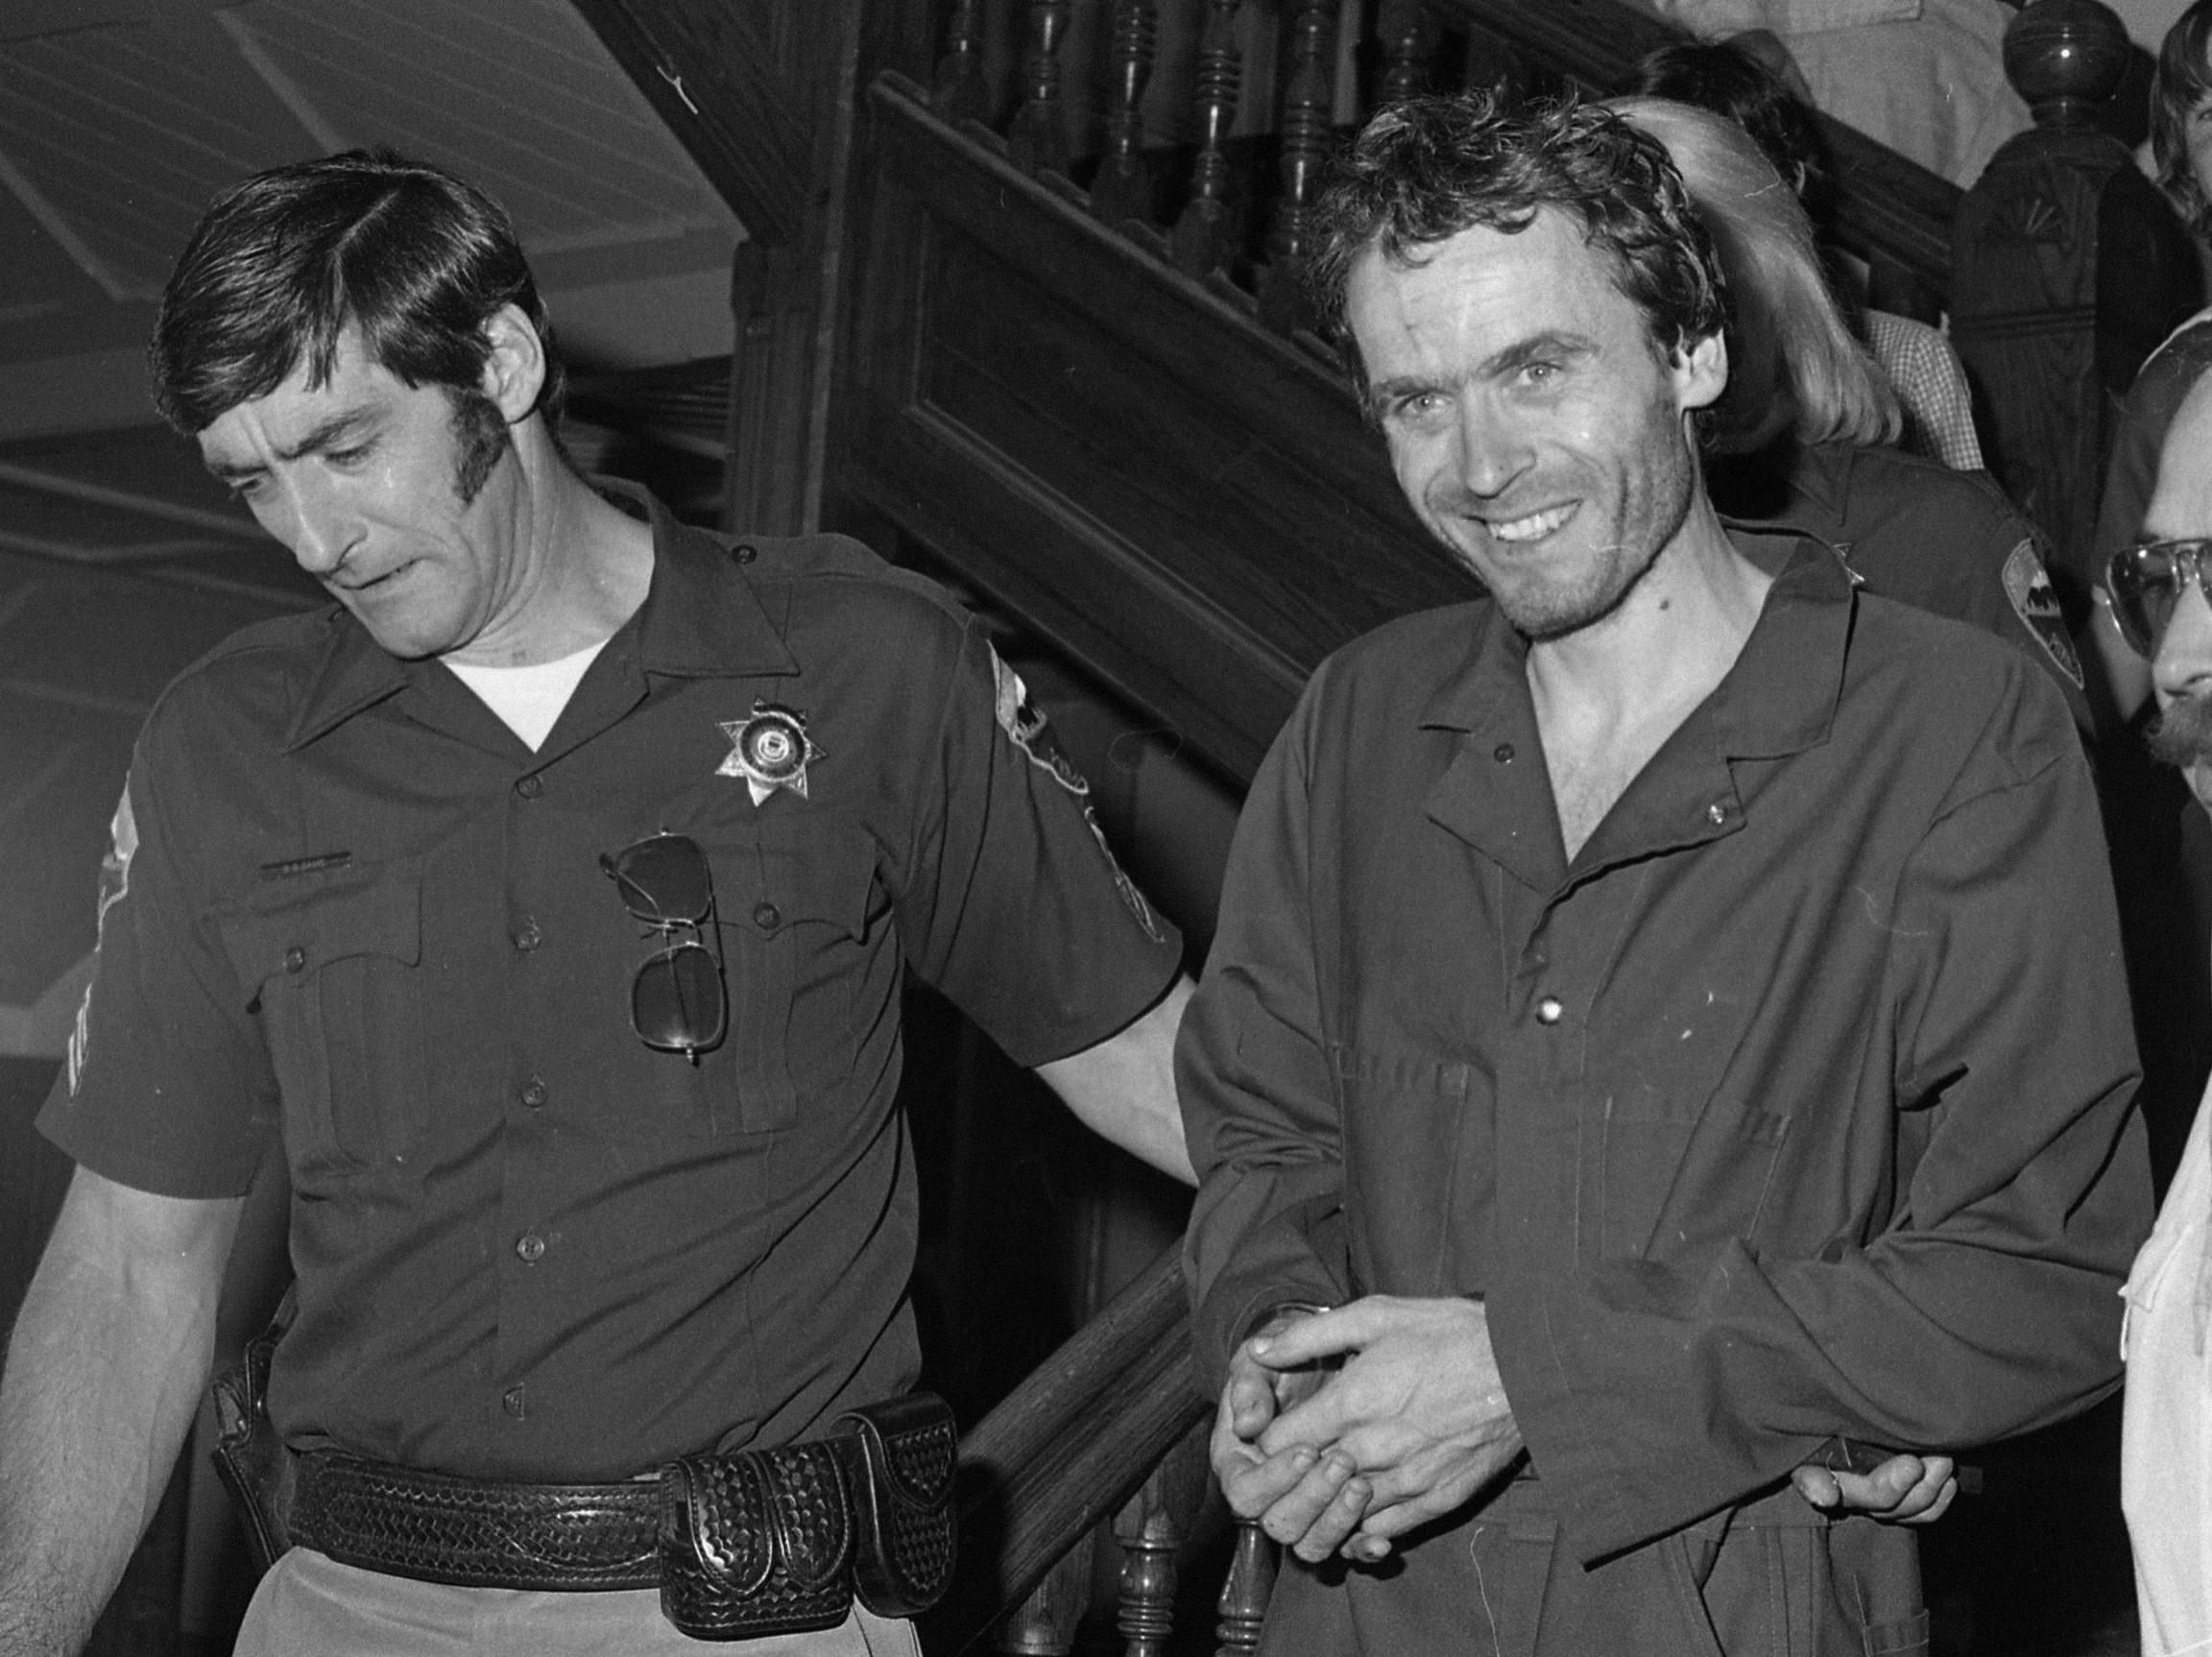 In this 1977 file photo, serial killer Ted Bundy, centre, is escorted out of court at the Pitkin County courthouse, Aspen, Colo. (Ross Dolan/Glenwood Springs Post Independent via AP)